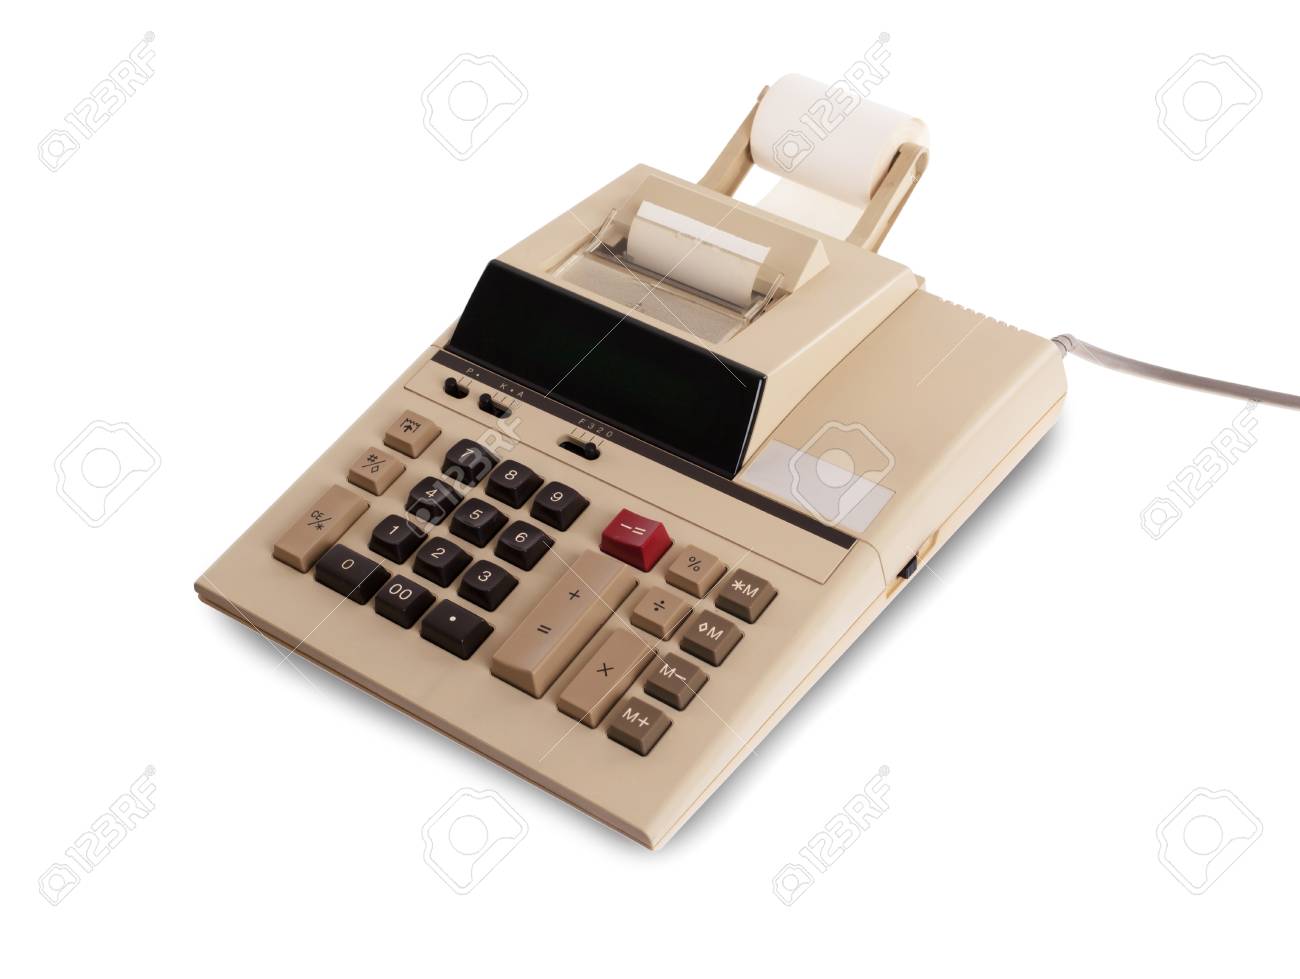 26335706-old-calculator-for-doing-office-related-work-isolated-in-white.jpg